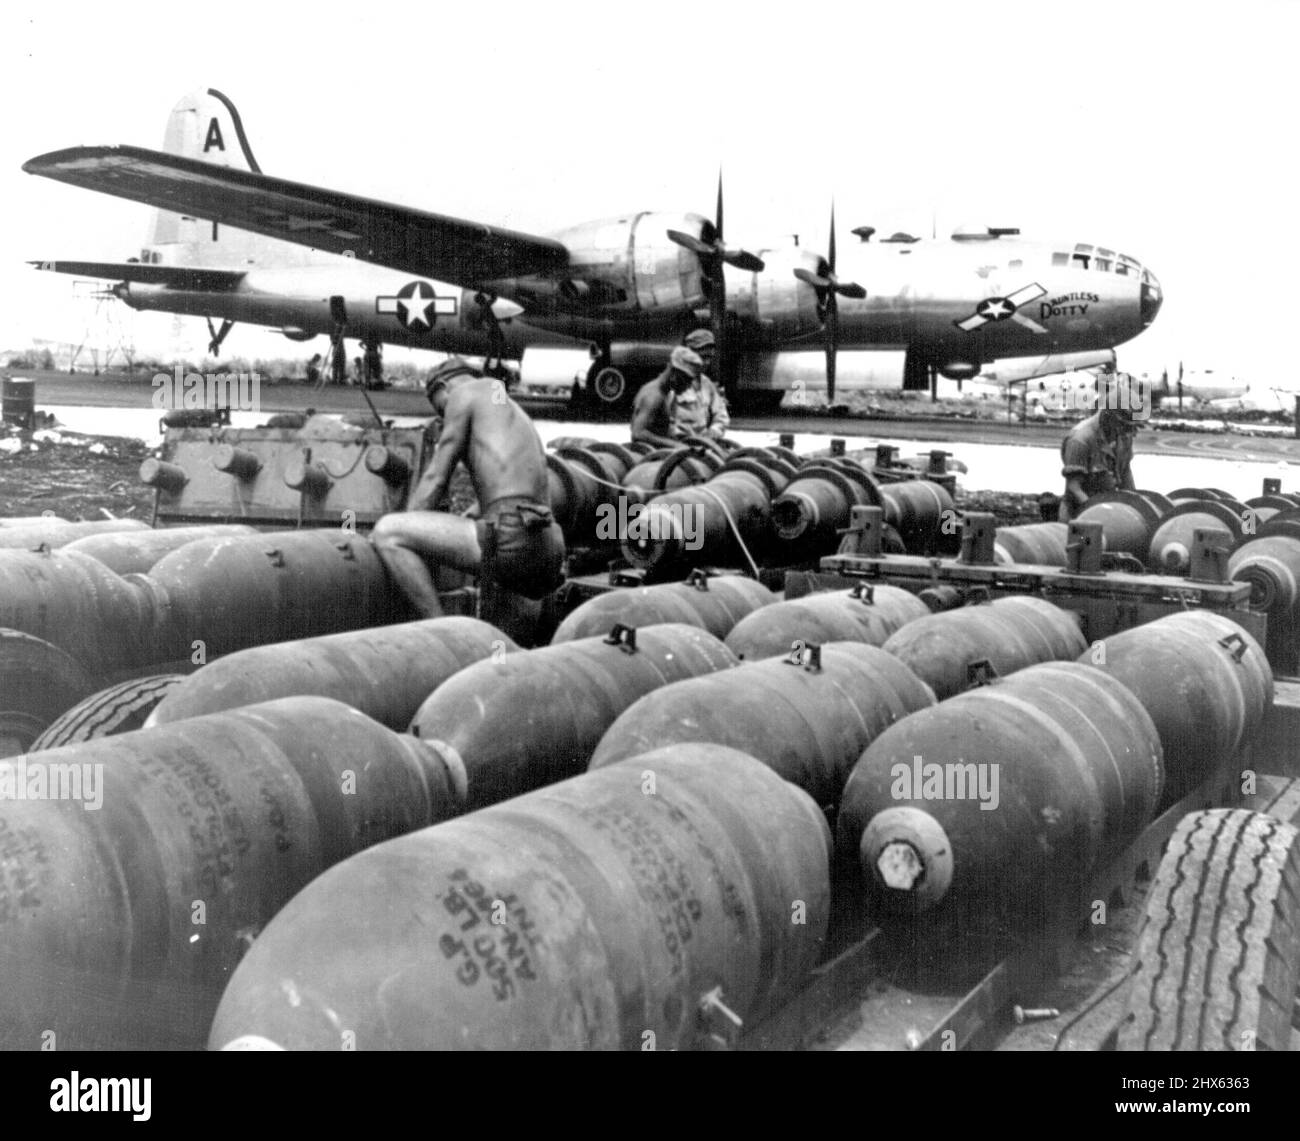 Saipan Superforts Prepared For Tokyo Attack Ground, crewmen prepare bombs for loading into a 3-29 Superfortress, the 'Dauntless Dotty' at the new American air base on Saipan Island in the Marianas. The plane led the first Superfortress attack on Tokyo on Nov.23, 1944, giving the Japanese capital its first taste of American explosives in more than two and one half years. The bombers set aflame key industrial centers, including the Musashino airplane plant, long a cherished target; and met little Stock Photo